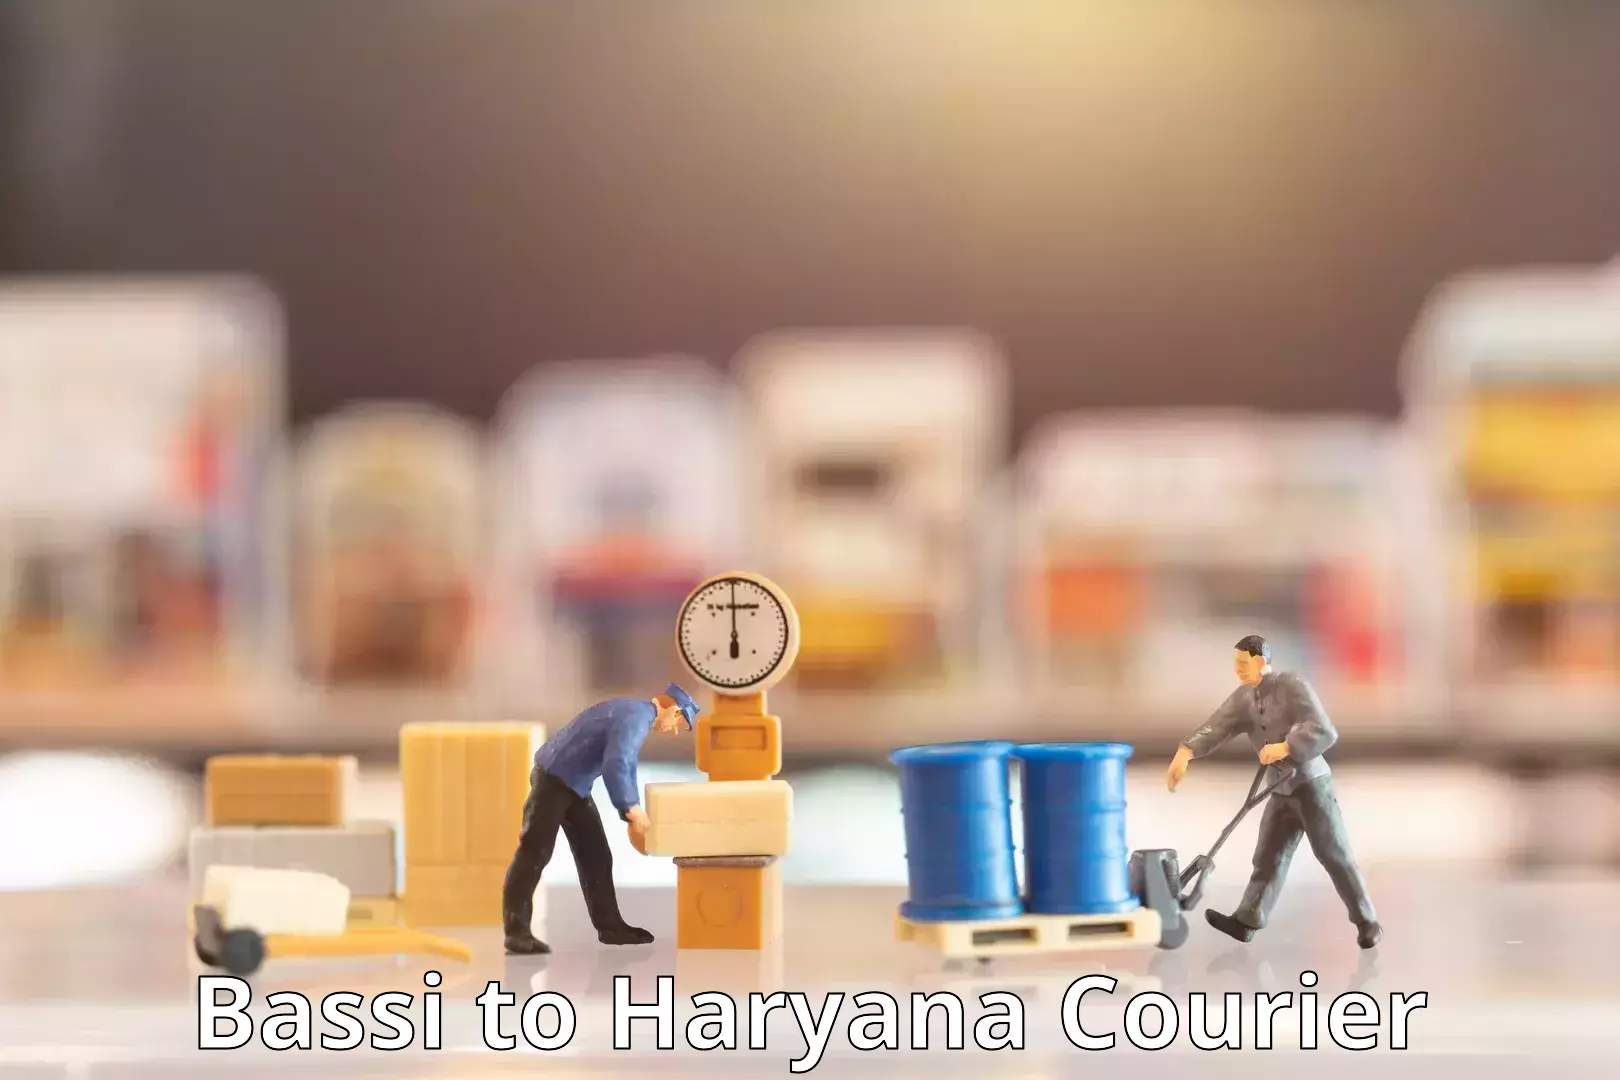 Business delivery service Bassi to Haryana